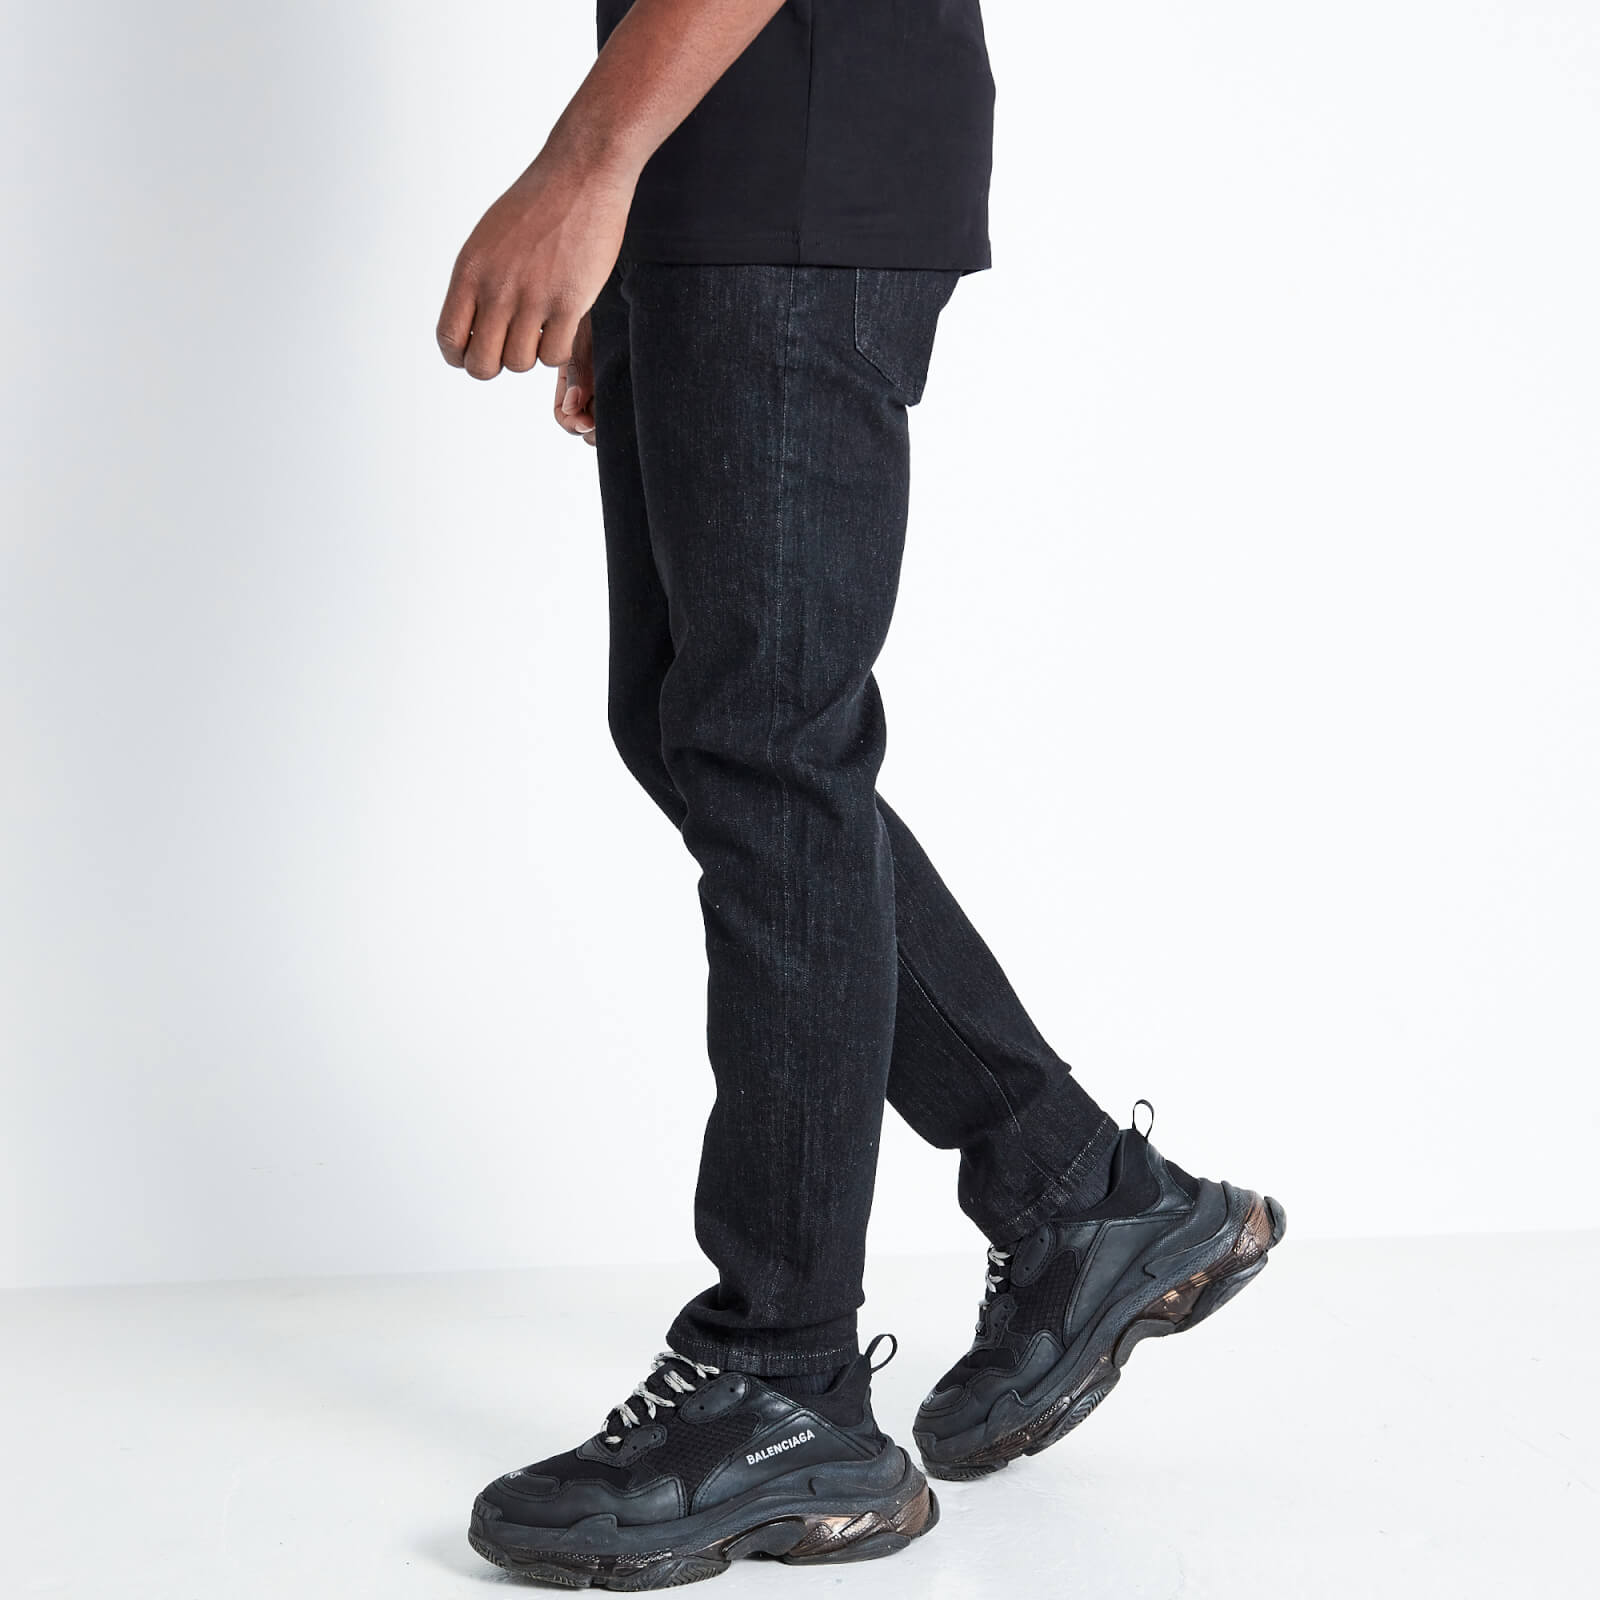 Sustainable Slim Tapered Jeans - W34 L30 from 11 Degrees